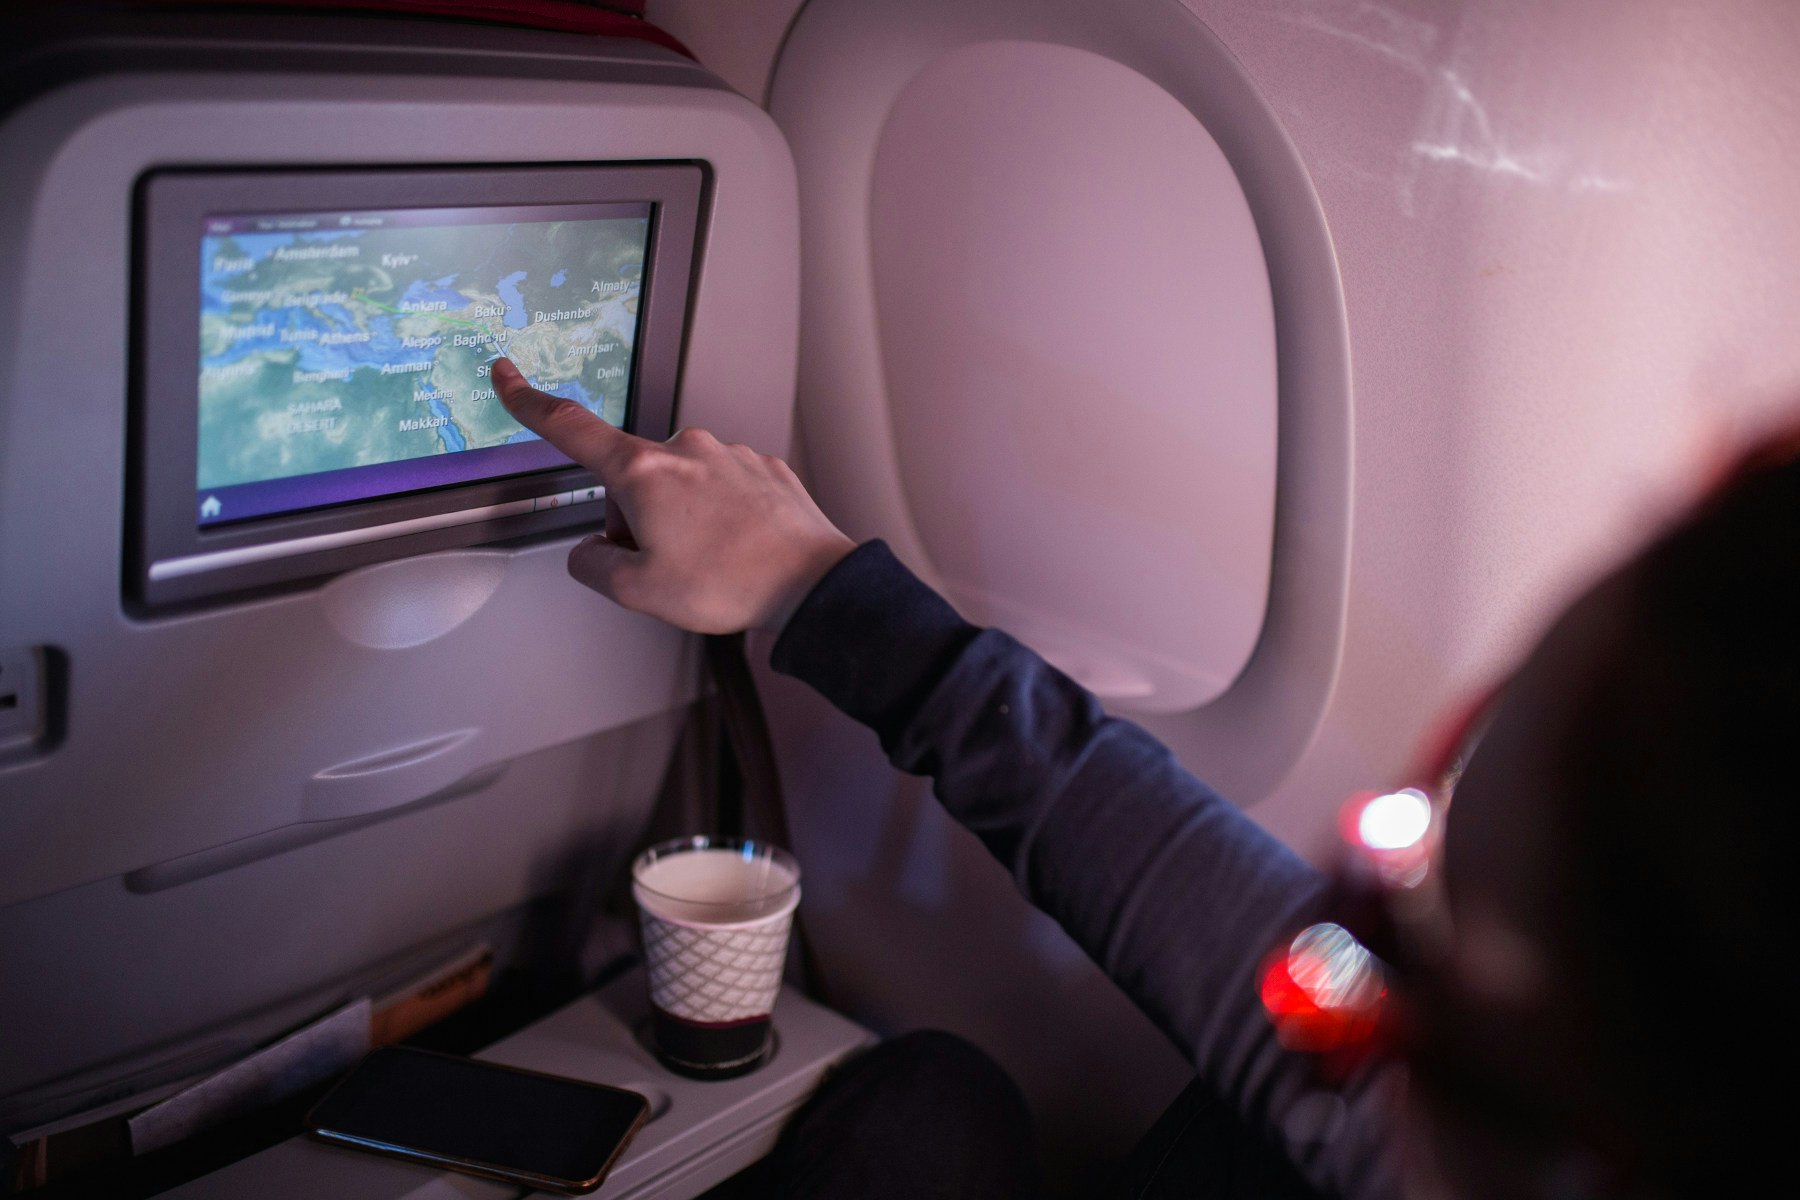 A finger comes up to touch the interactive map on an airplane screen.